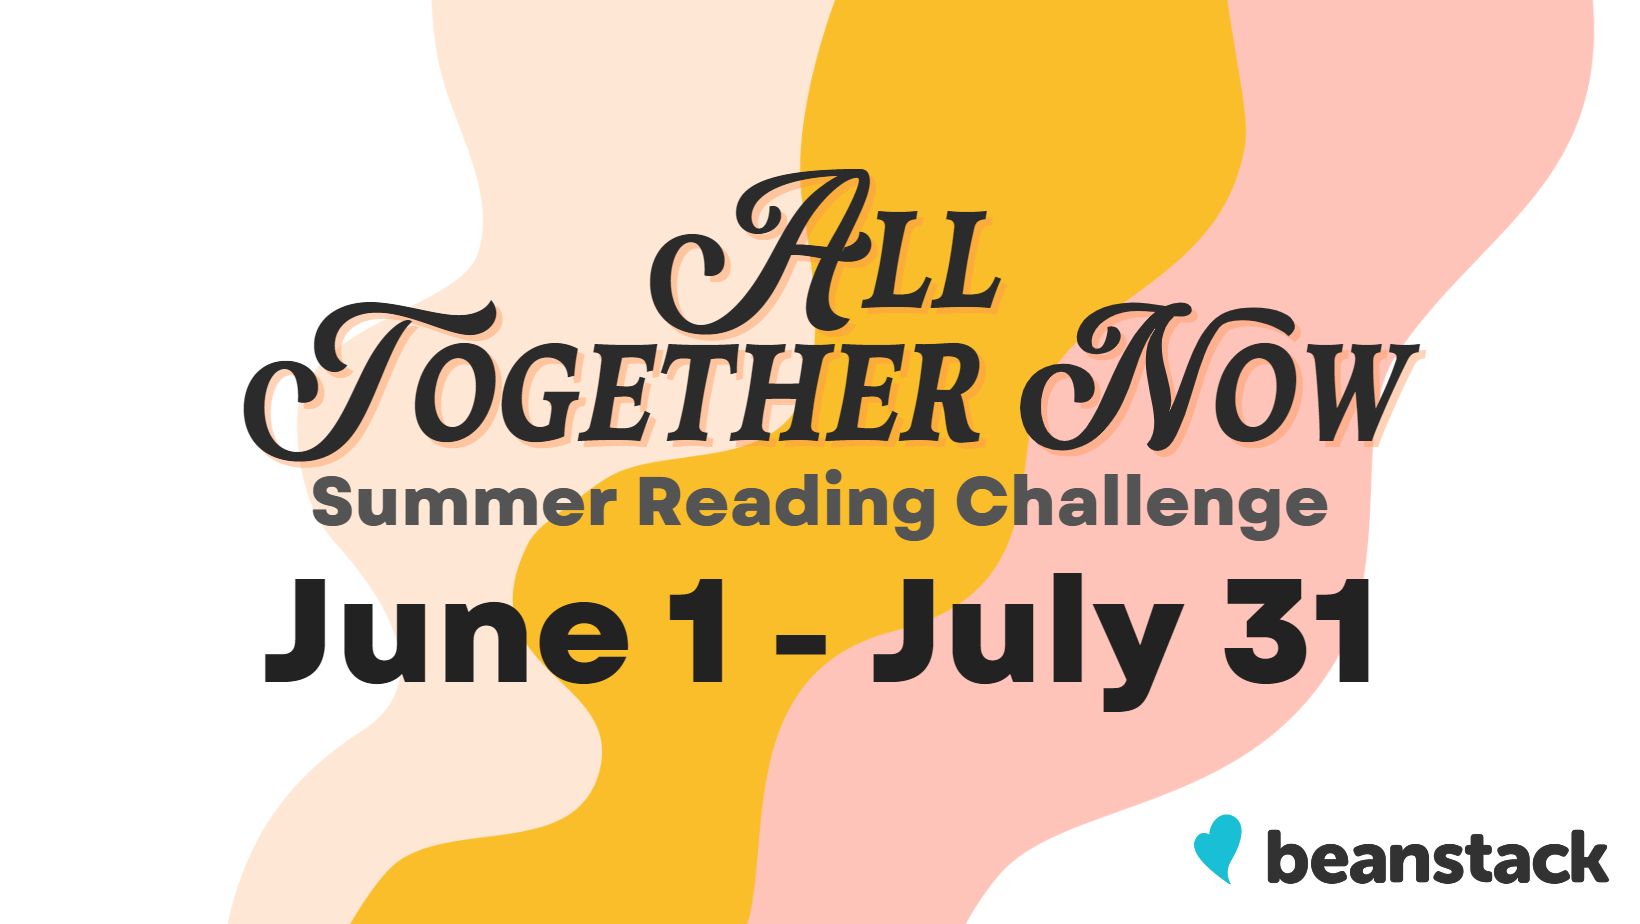 Summer Reading Announcement (Facebook Cover)